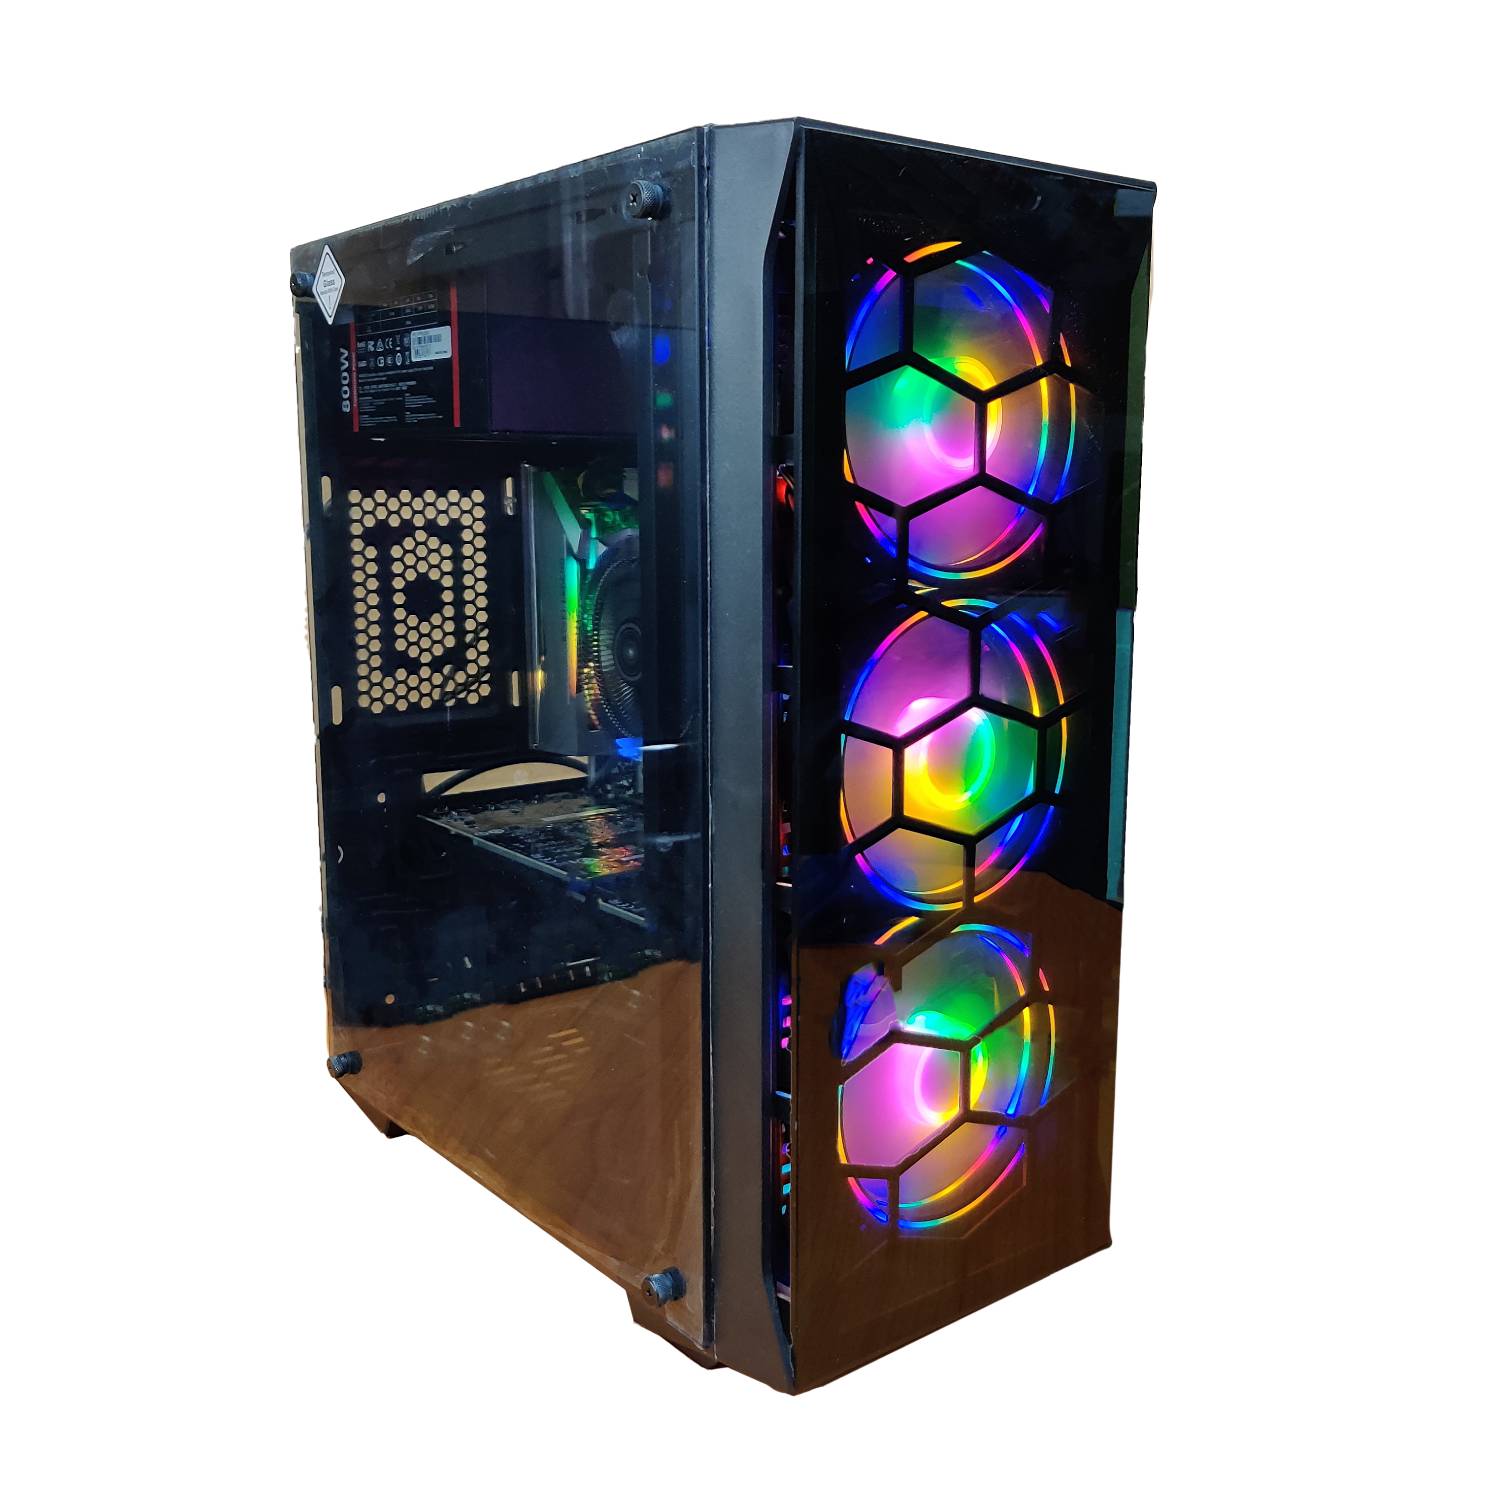 CASE GAMING METRO CONFLICT MID TOWER TEMPERED GLASS 3 FAN INCLUDED ,Case & Power Supply